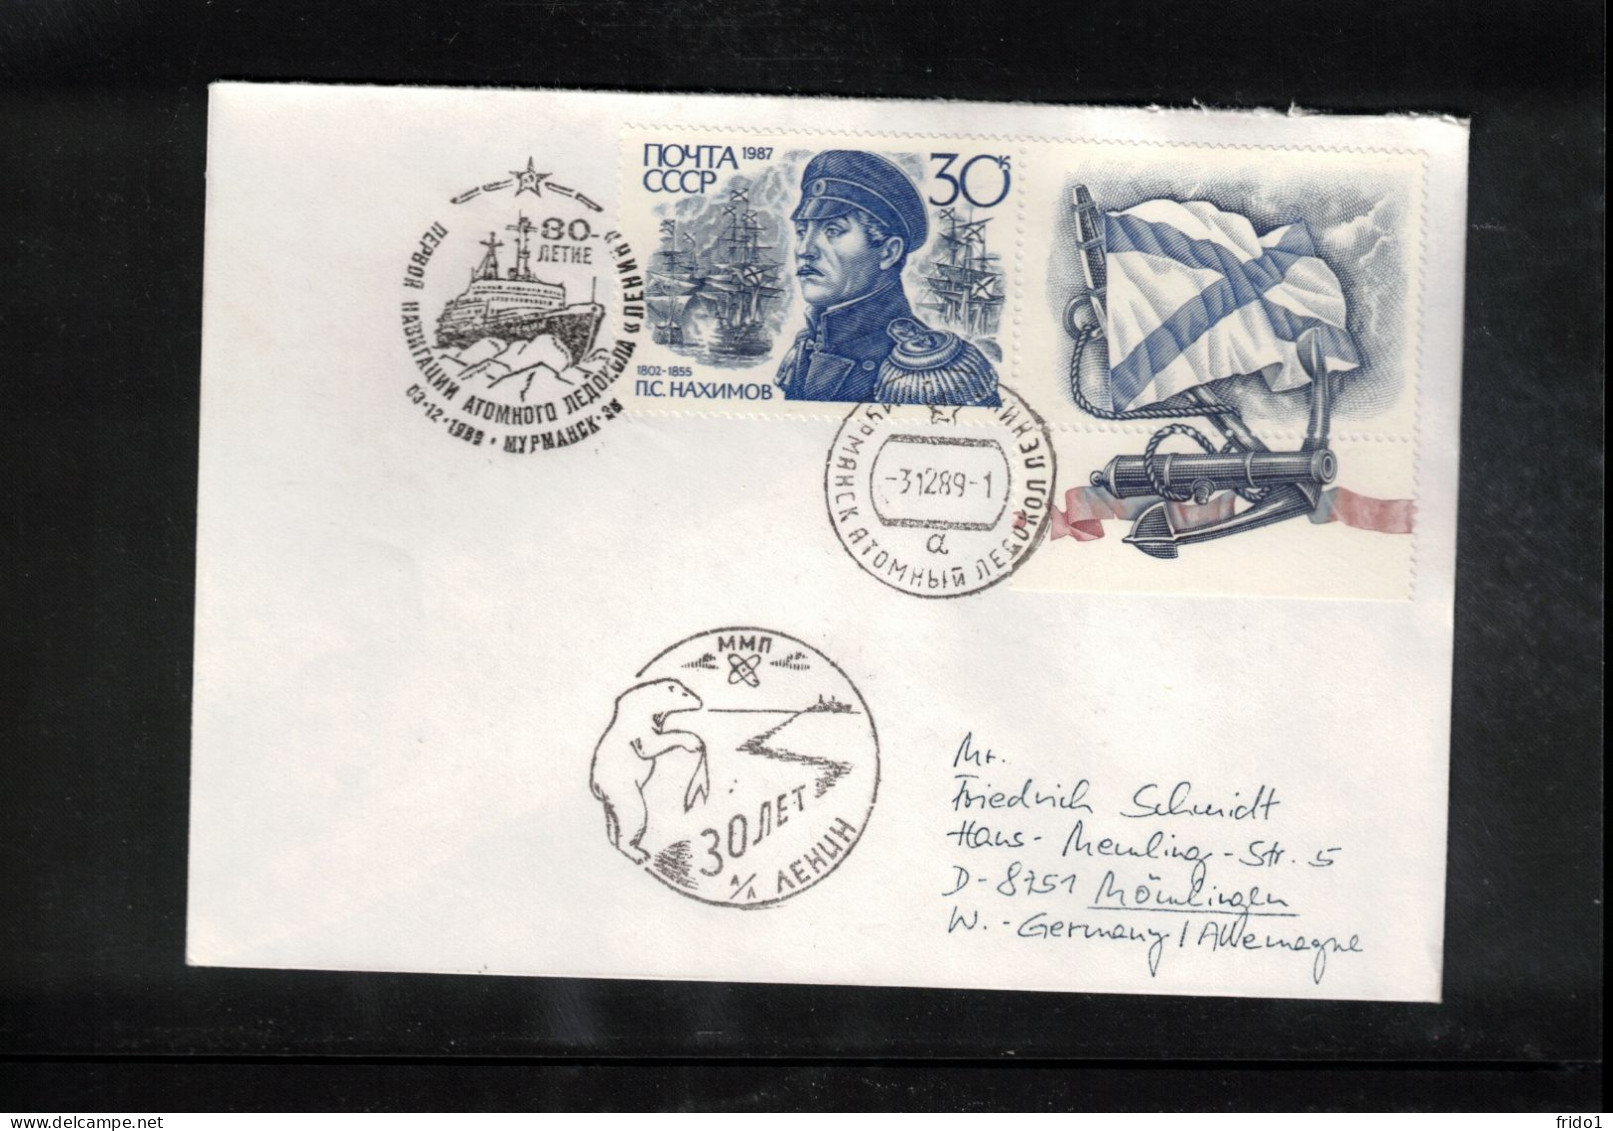 Russia USSR 1989 30th Anniversary Of Nuclear Icebreaker LENIN Interesting Cover - Ships